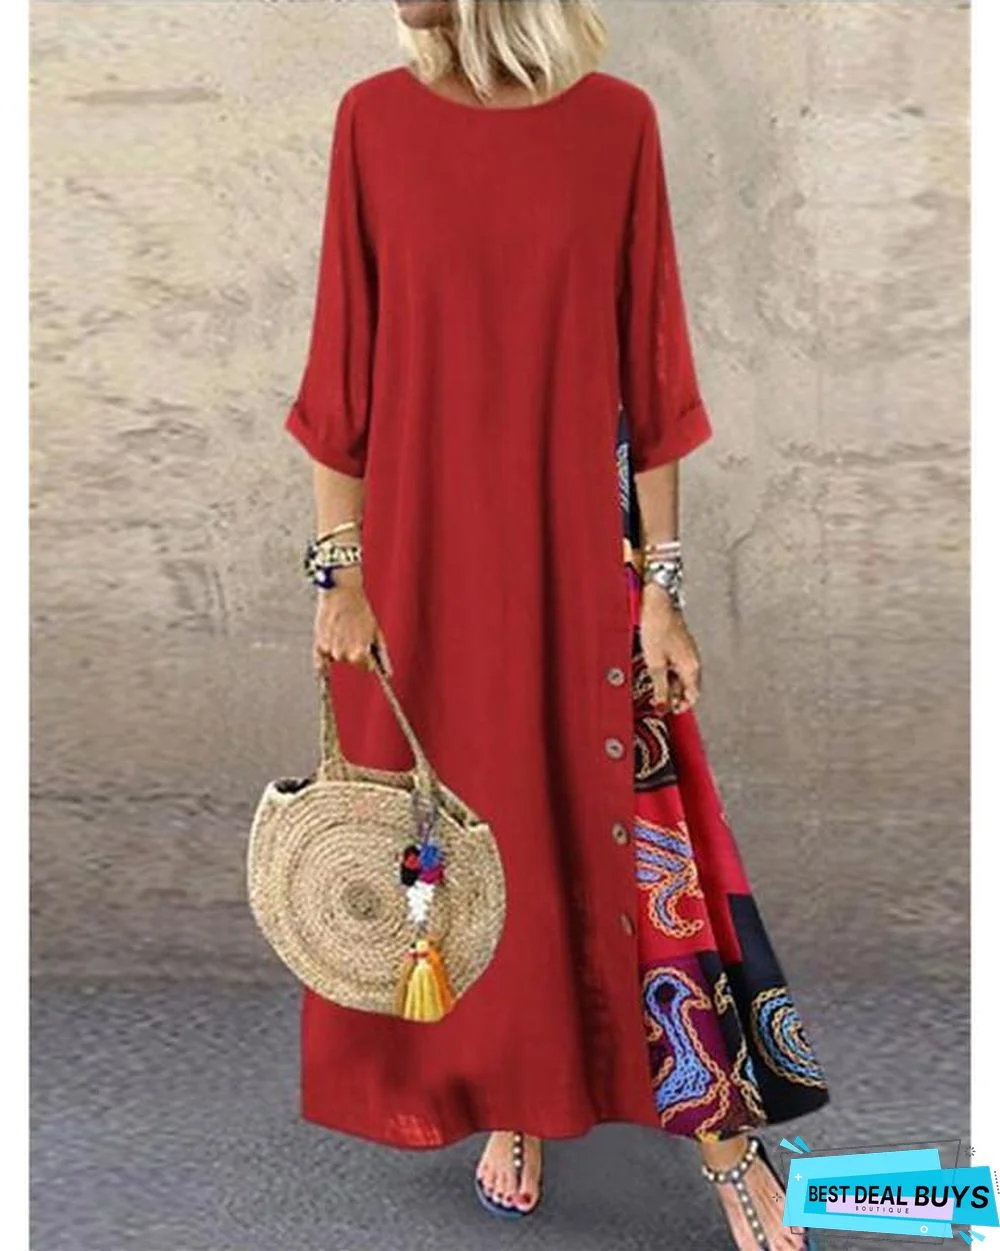 Women's Swing Dress Maxi Long Dress - 3/4 Length Sleeve Print Spring & Summer Hot Casual Holiday Vacation Dresses Loose Red Yellow Wine Army Green Navy Blue Gray L